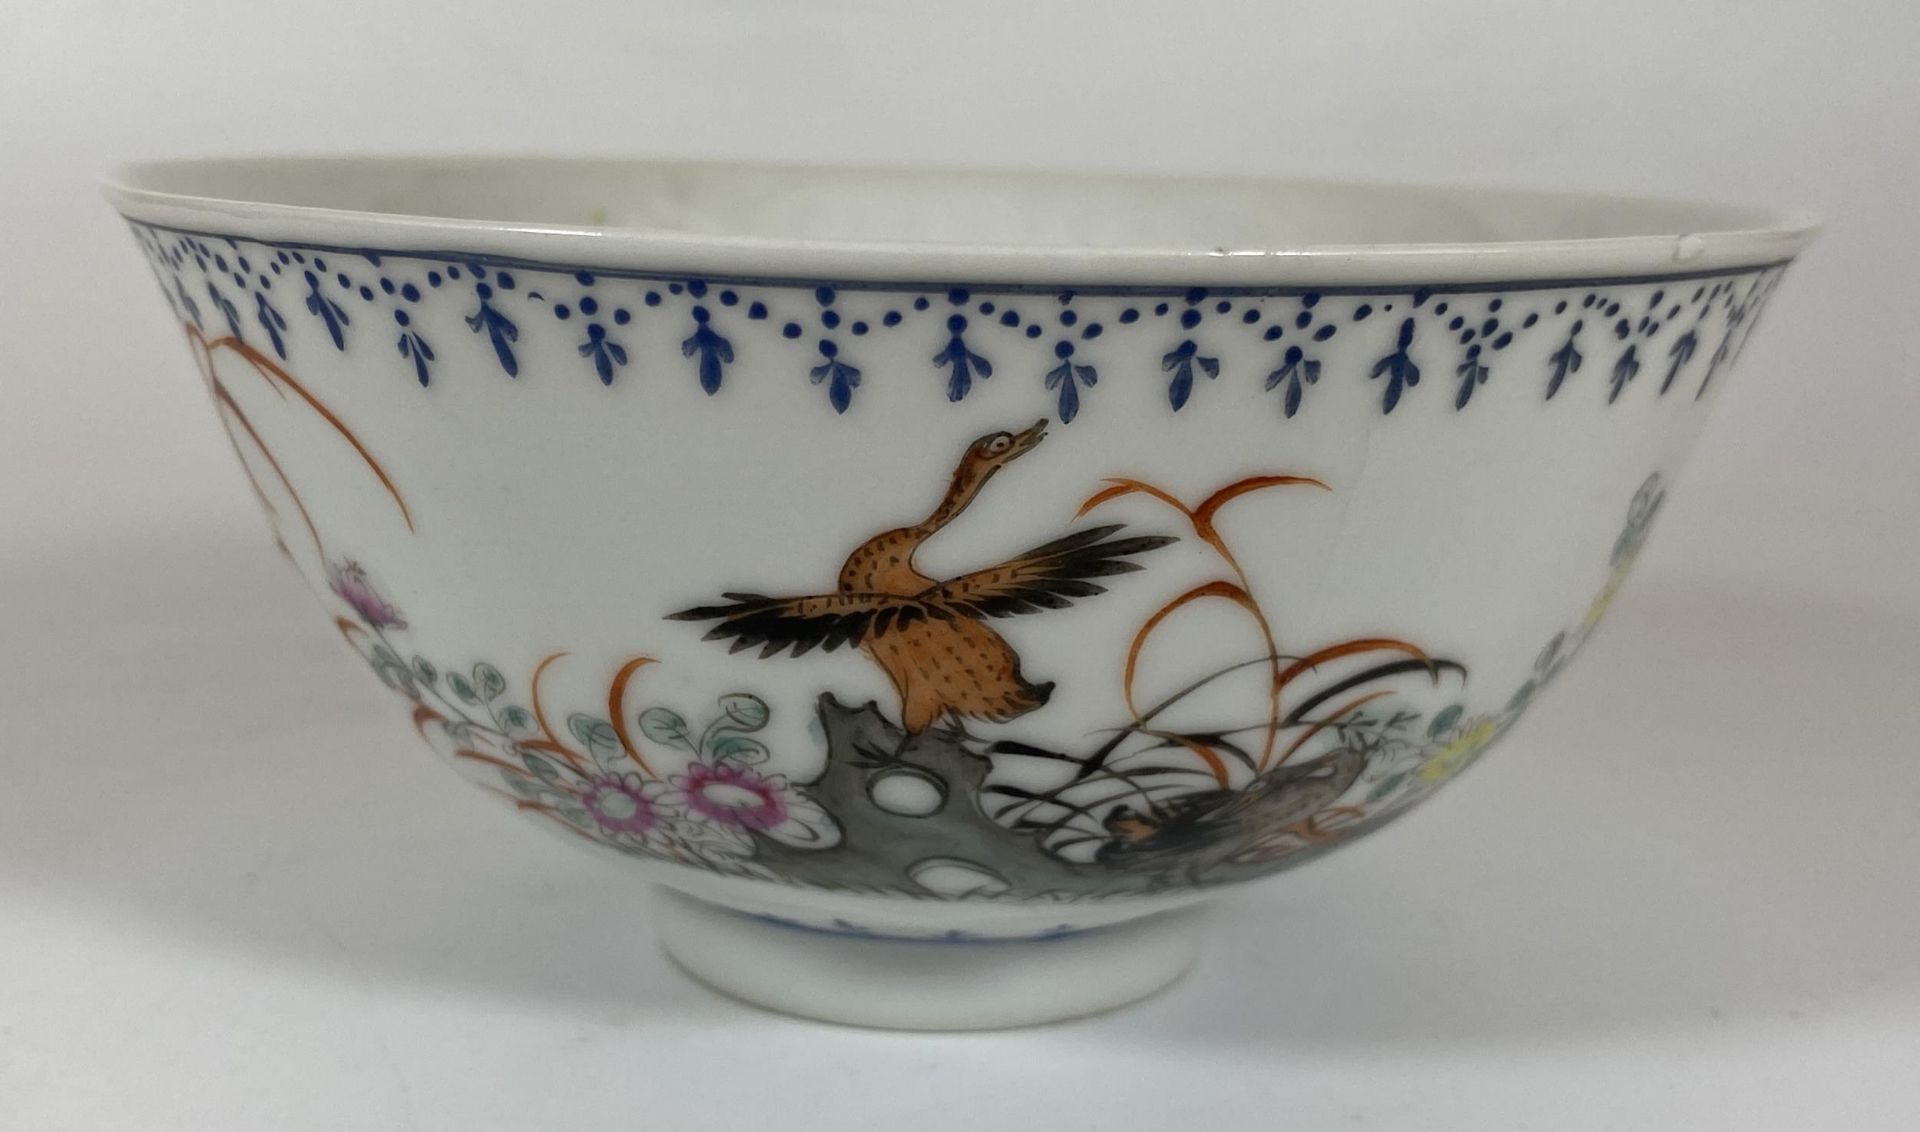 AN EARLY 20TH CENTURY CHINESE QING PORCELAIN BOWL WITH DUCK IN FLIGHT DECORATION, QIANLONG MARK TO